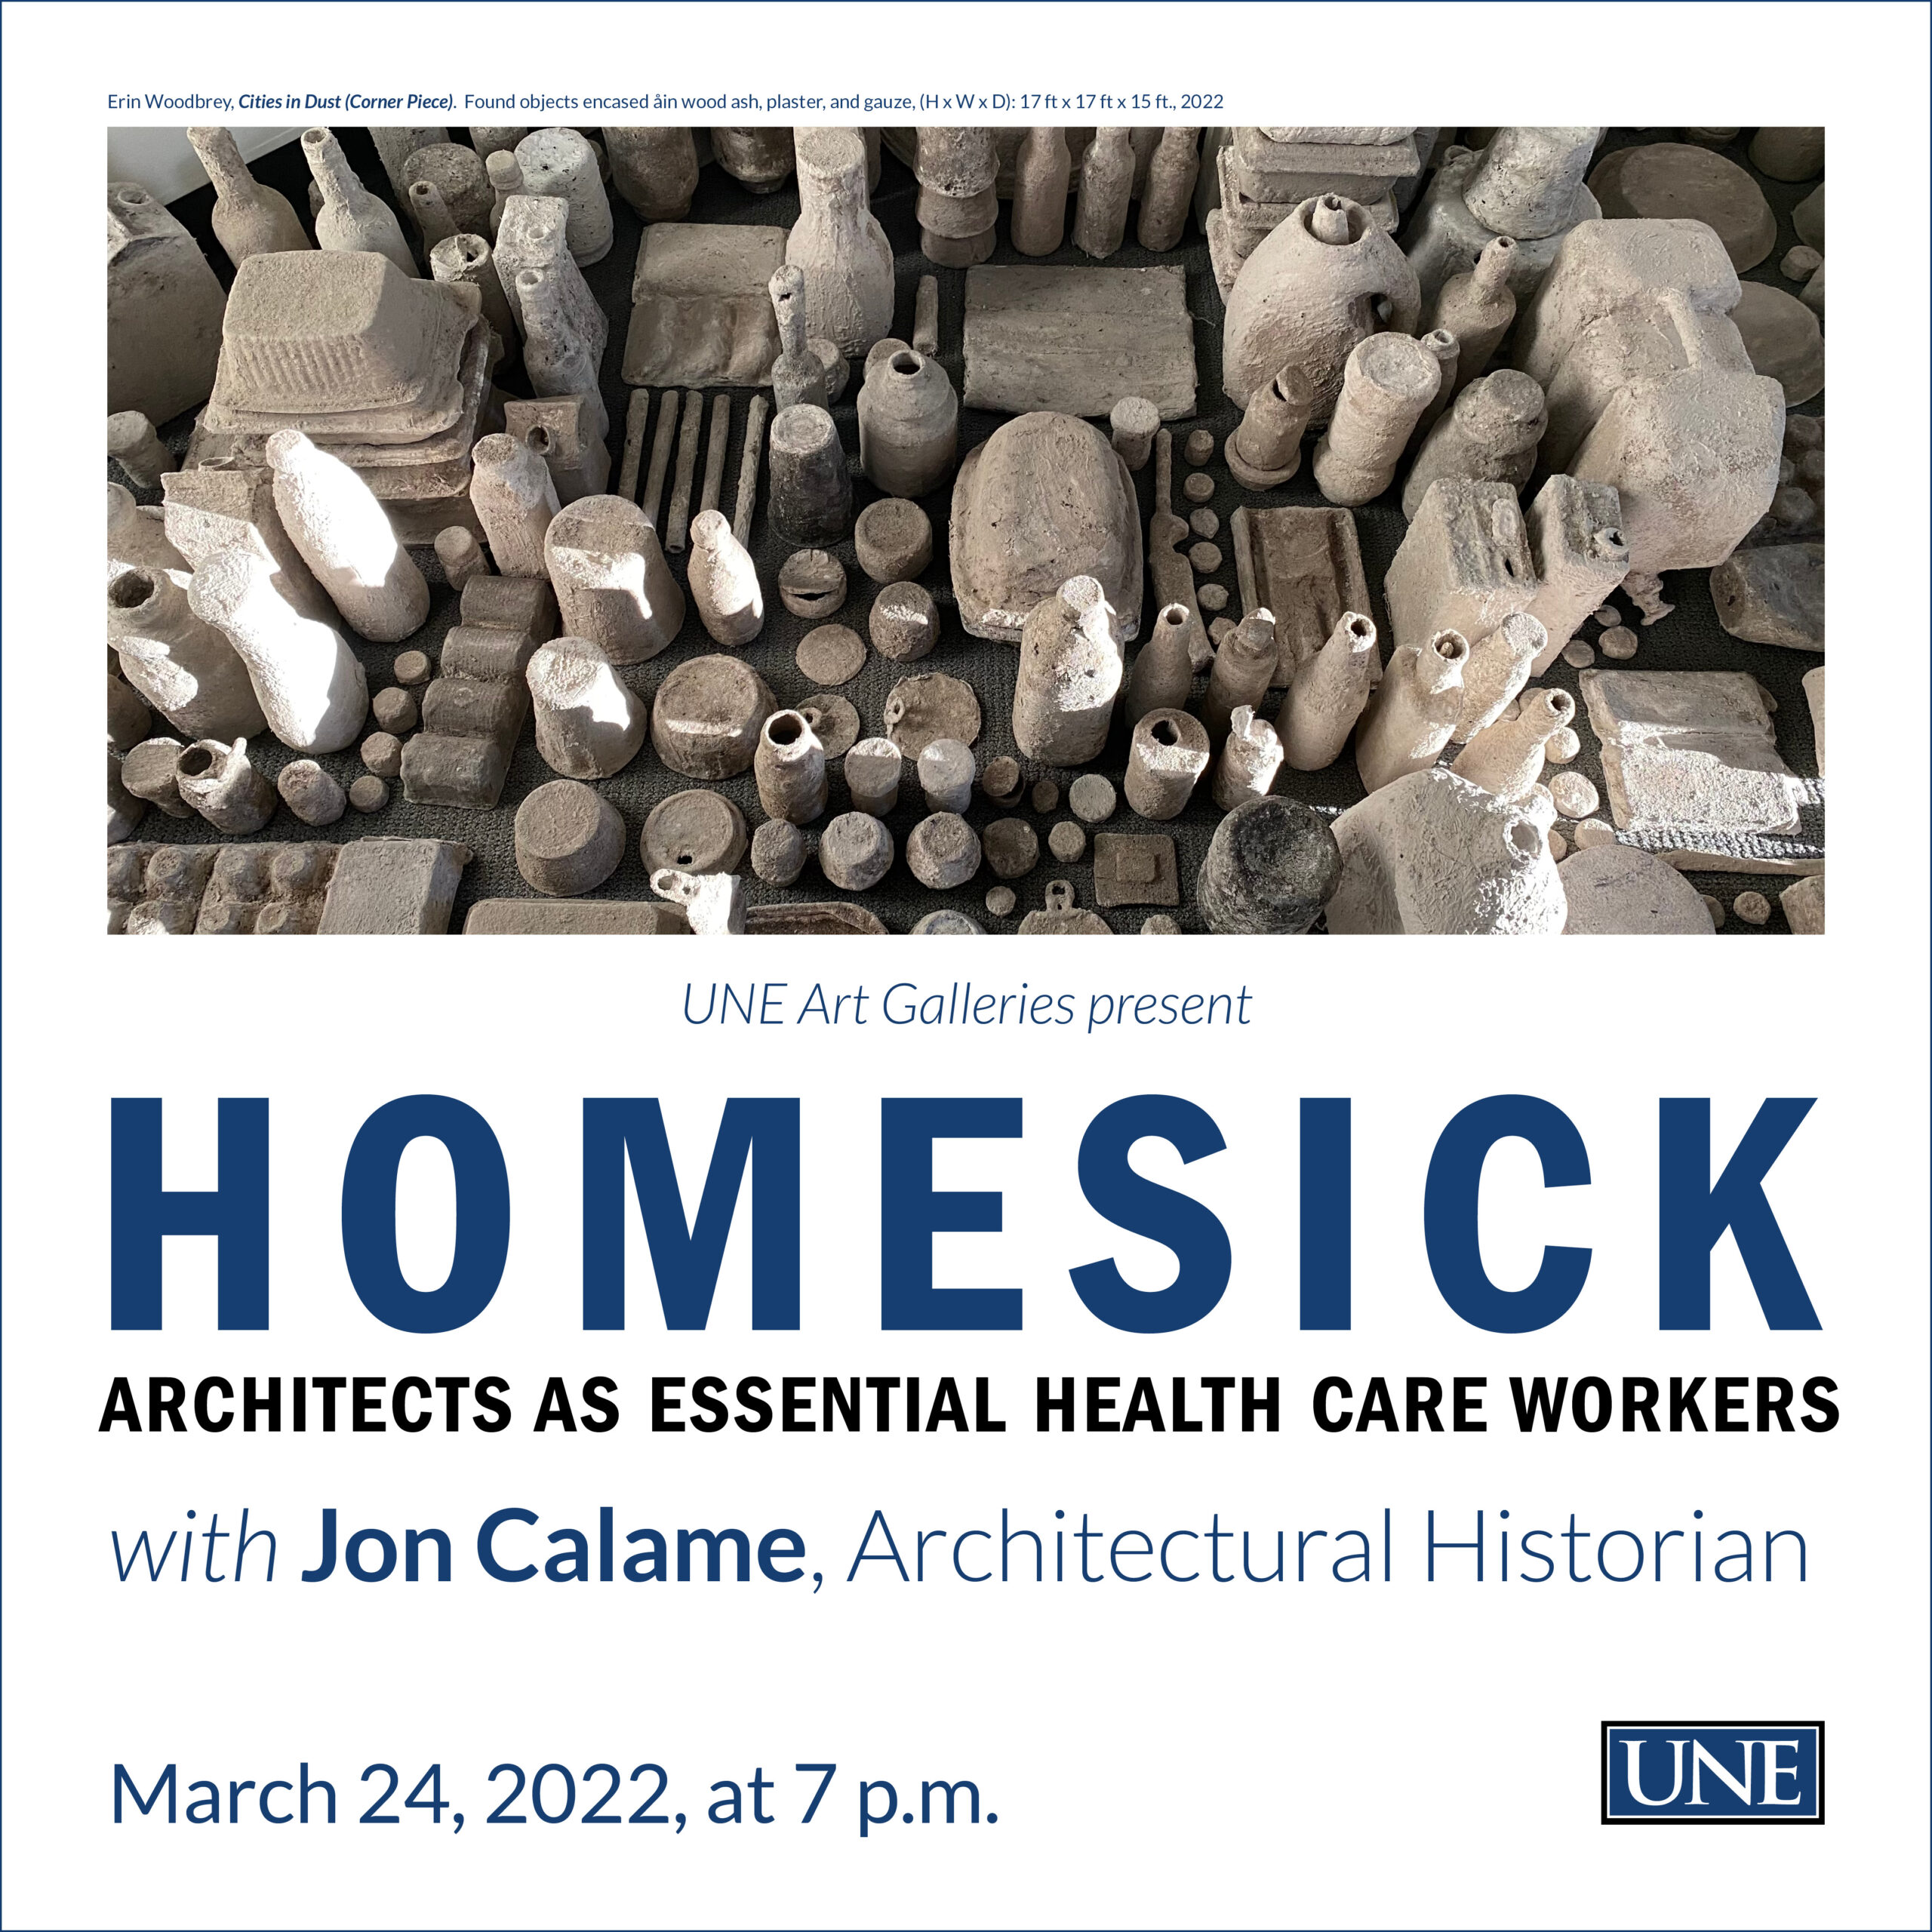 Homesick: Architects as Essential Health Care Workers